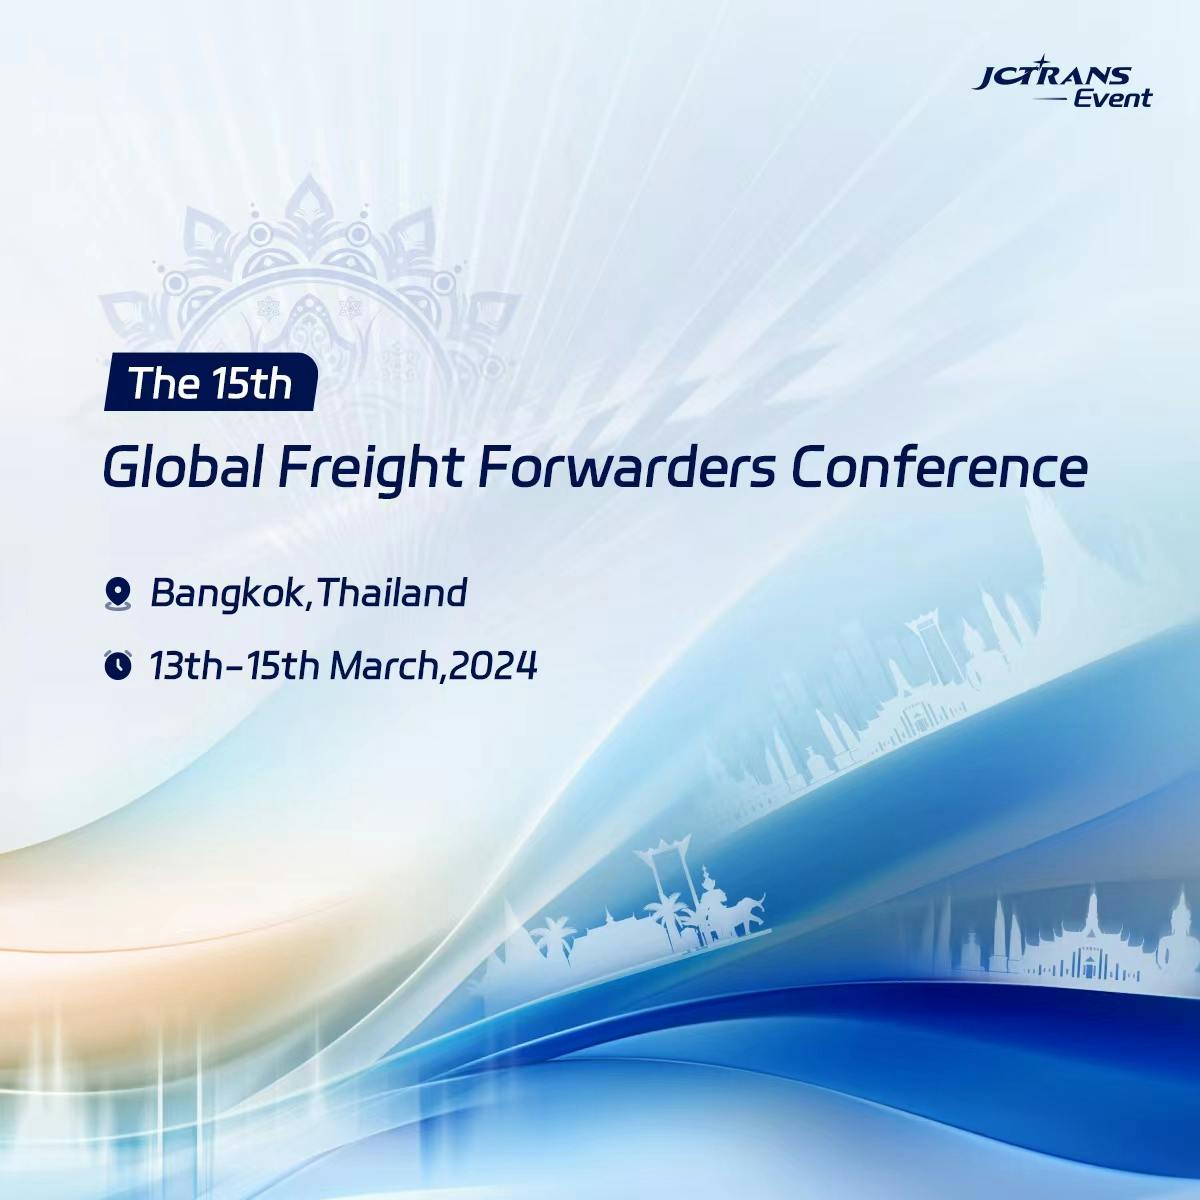 The 15th Global Freight Forwarders Conference